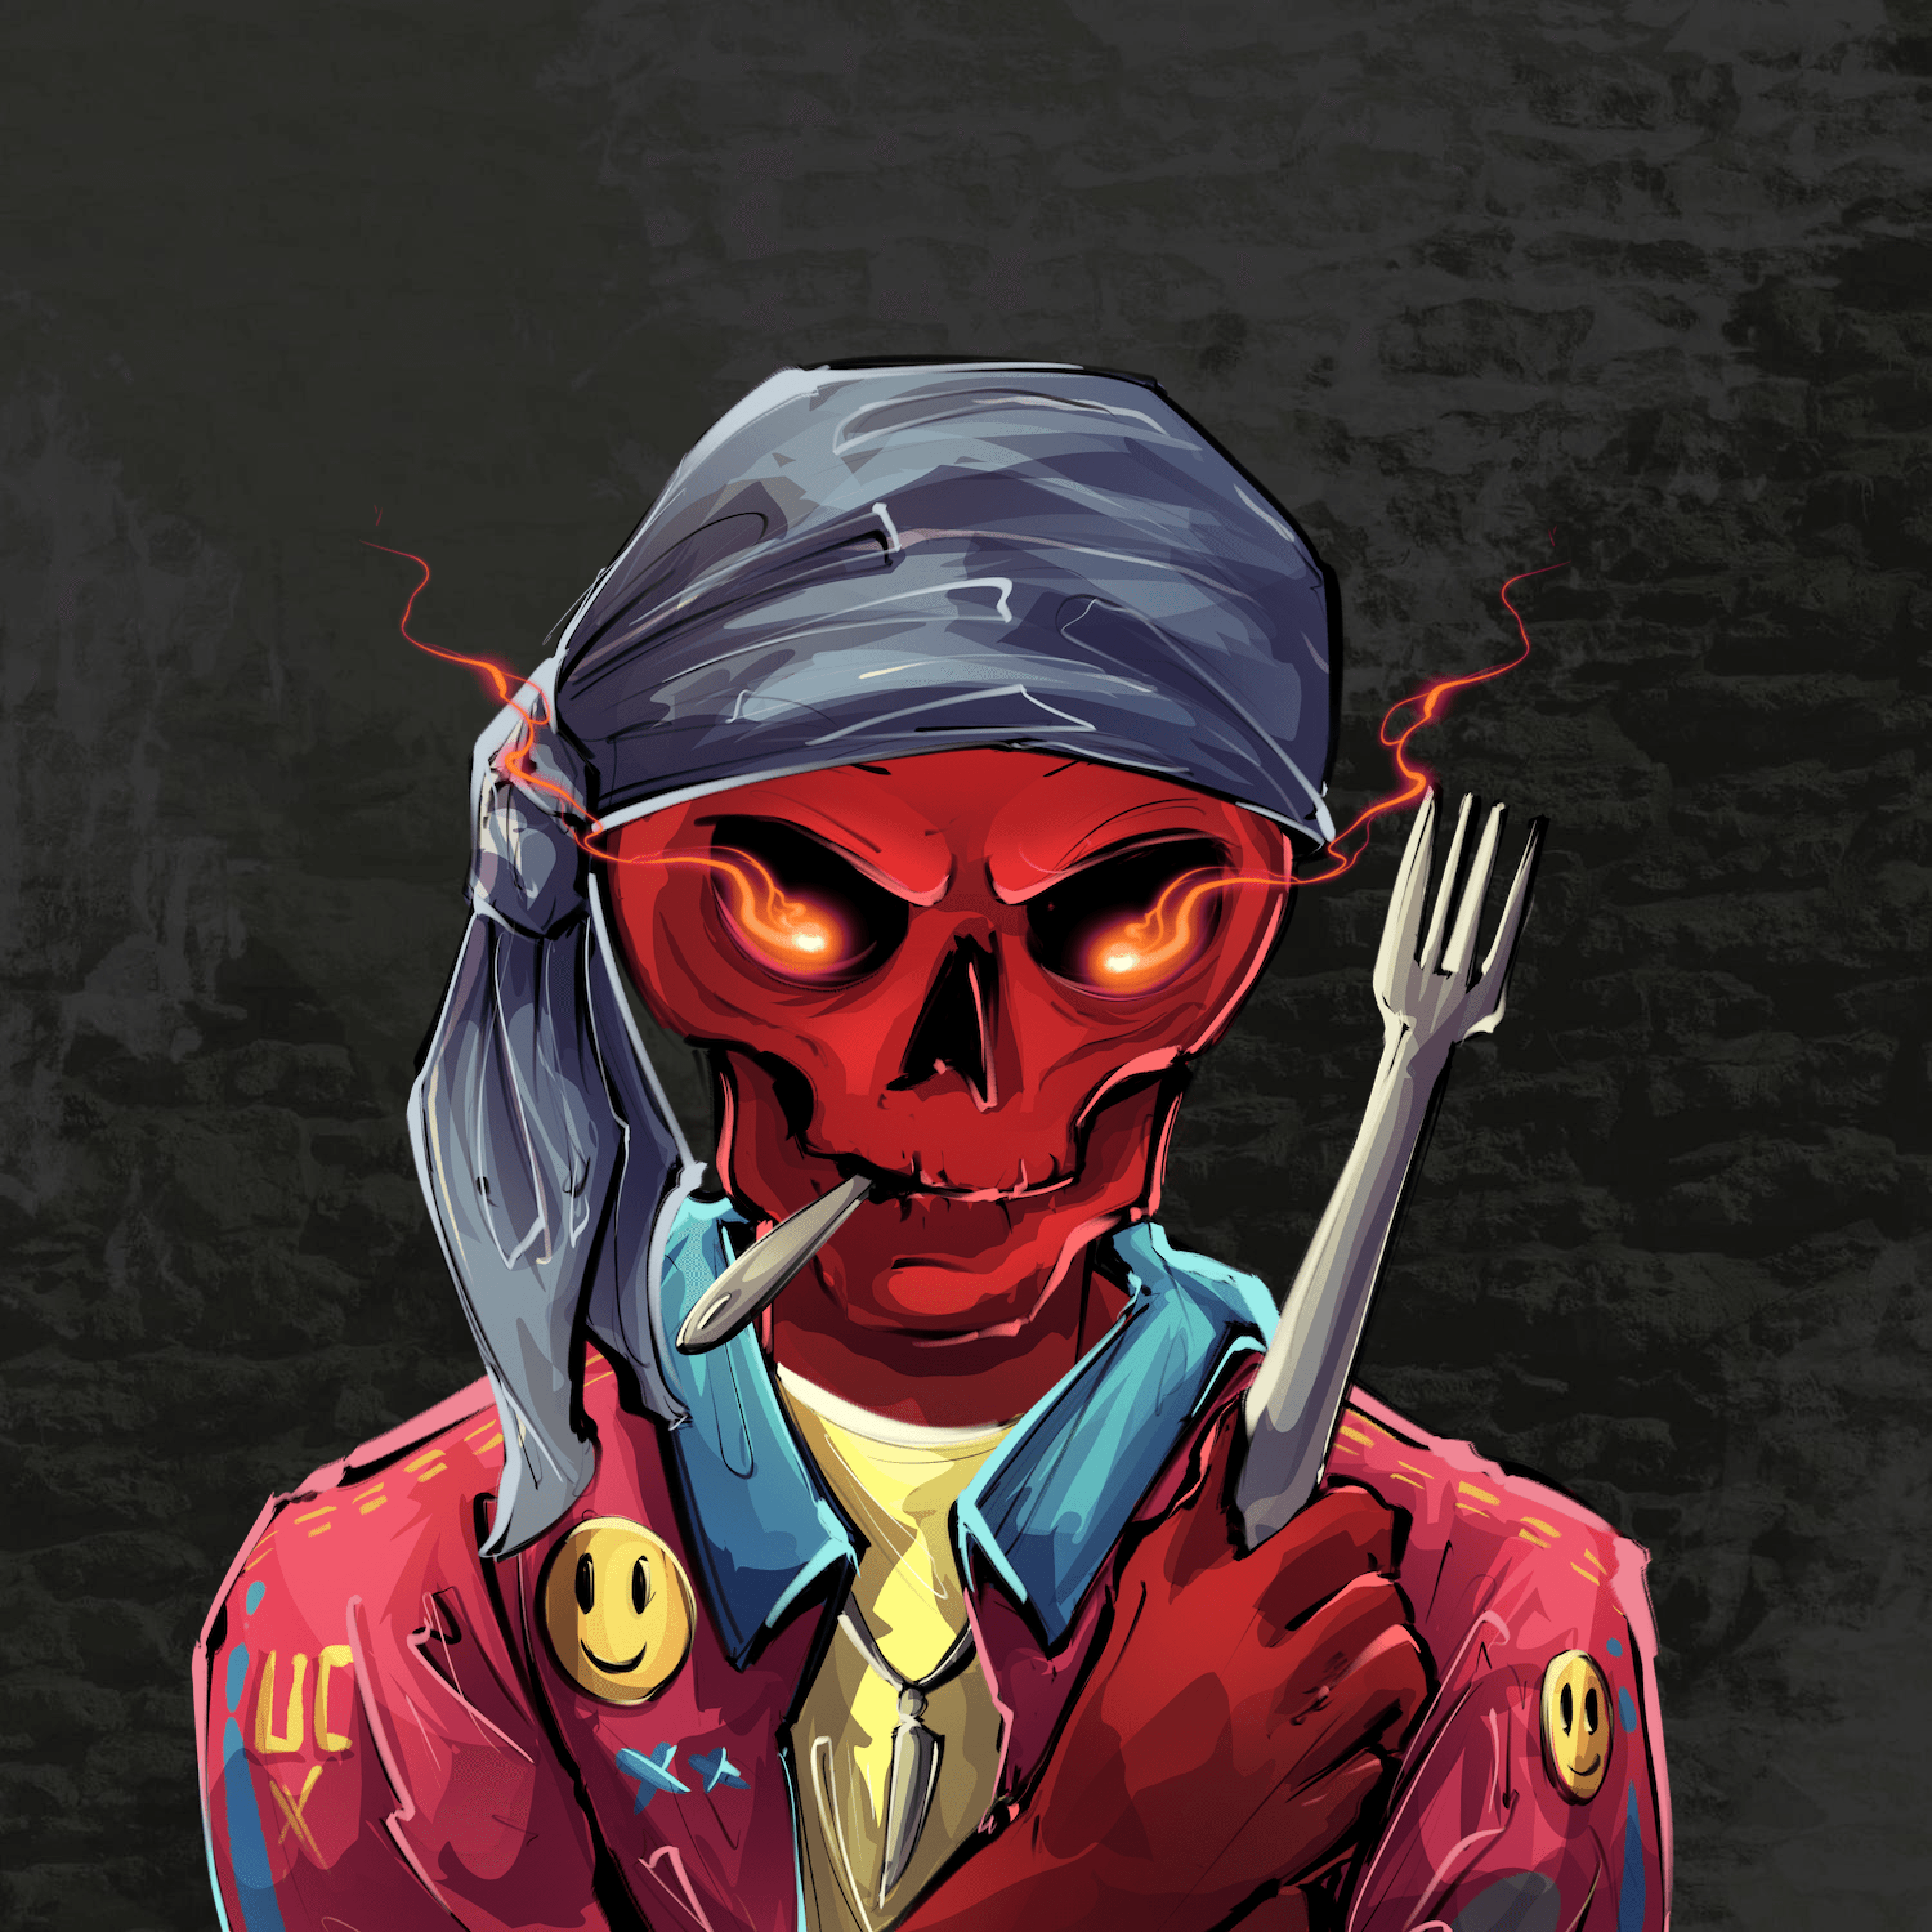 Undead Chefs #786